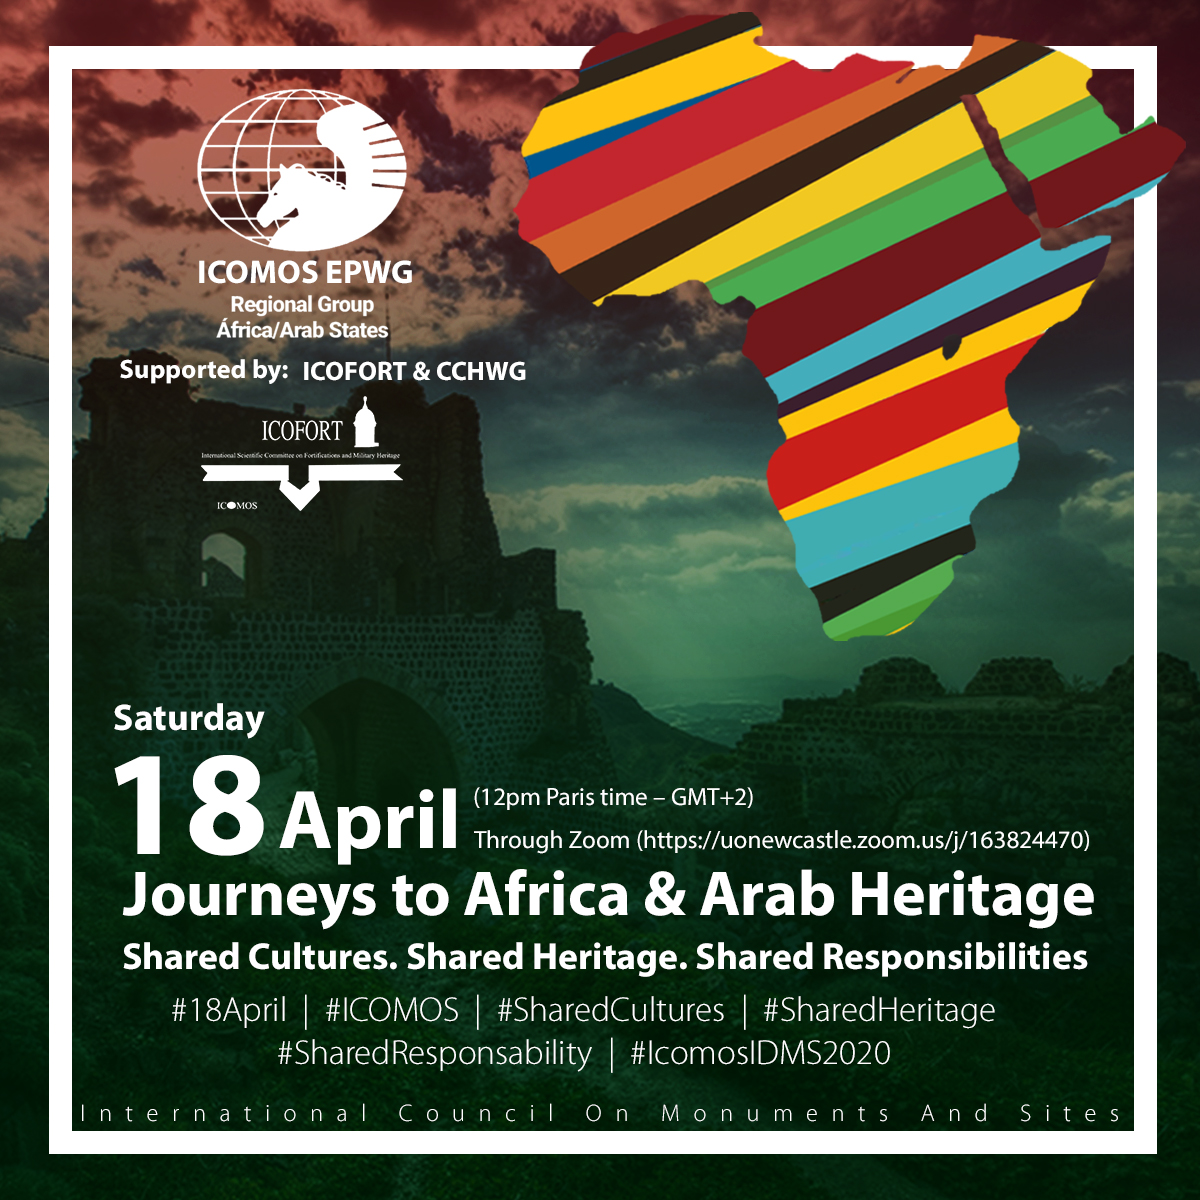 ICOMOS EPWG Africa and Arab State Regions Event 18 April 2020